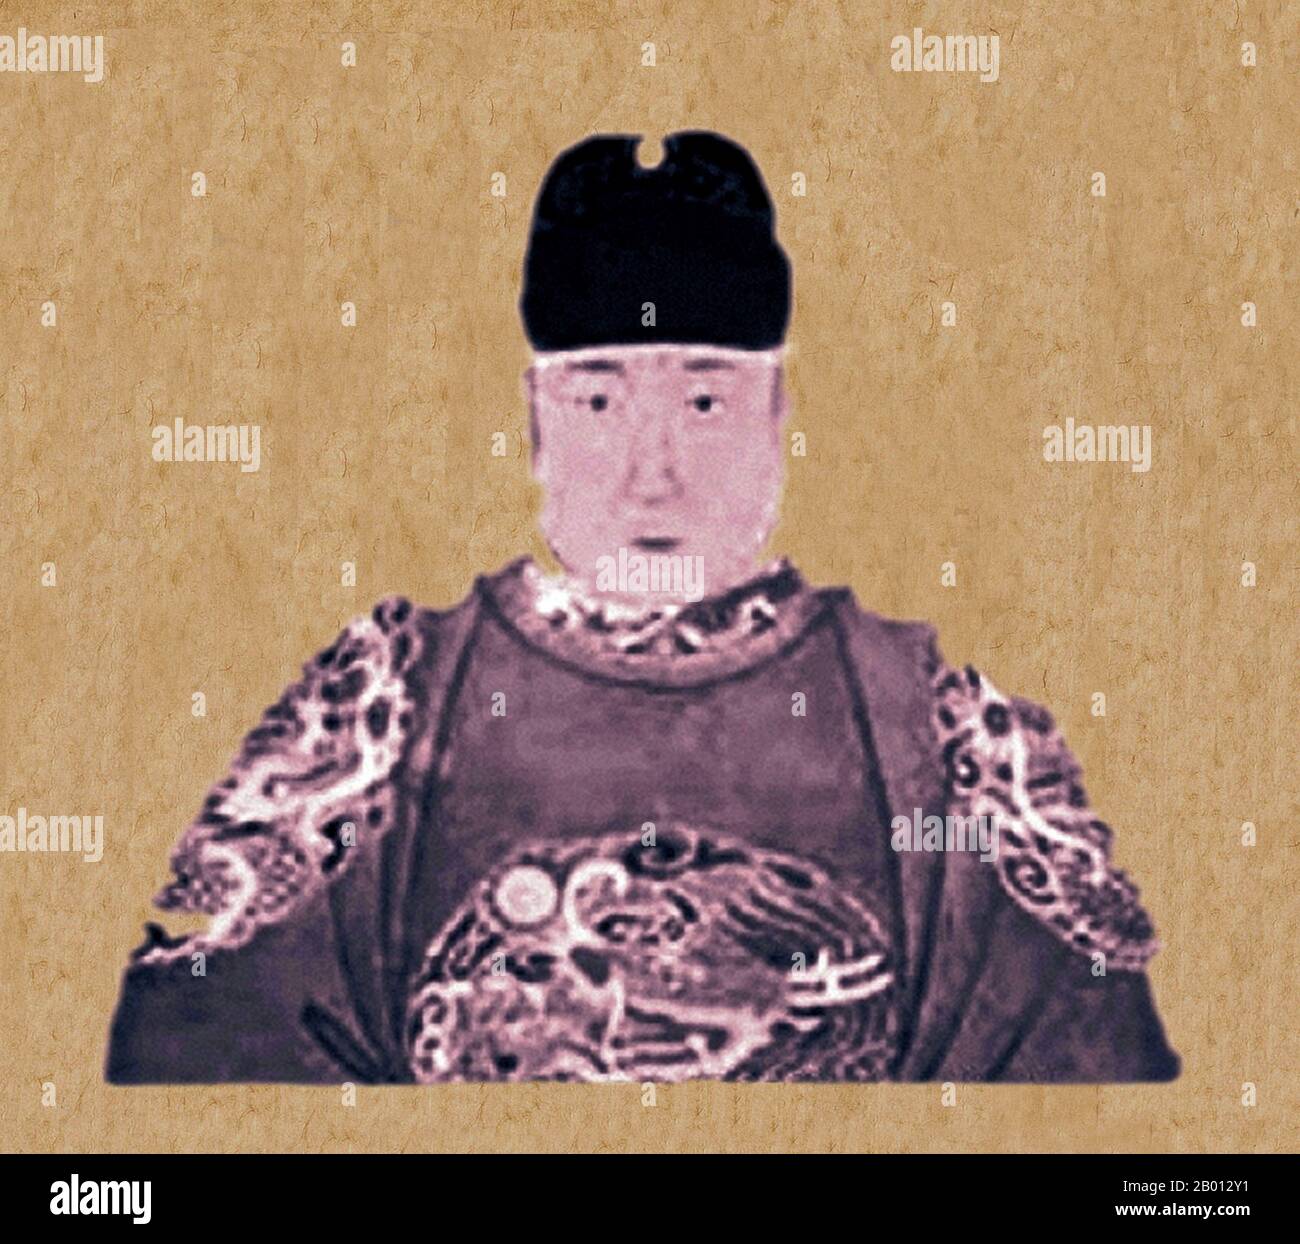 China: Emperor Jianwen, 2nd ruler of the Ming Dynasty (r. 1398-1402), 14th-17th century.  The Jianwen Emperor, personal name Zhu Yunwen, reigned as the second Emperor of the Ming dynasty. His reign name, Jianwen, means 'Establishment of civil virtue'. The Jianwen reign was short (1398–1402). After he assumed the throne, the Jianwen Emperor began to suppress feudal lords, which included his uncle Zhu Di, who subsequently rebelled against him. Zhu Di's army reached Nanjing in 1402 and burned down the palace, supposedly with the emperor and his family inside, though a body was never confirmed. Stock Photo